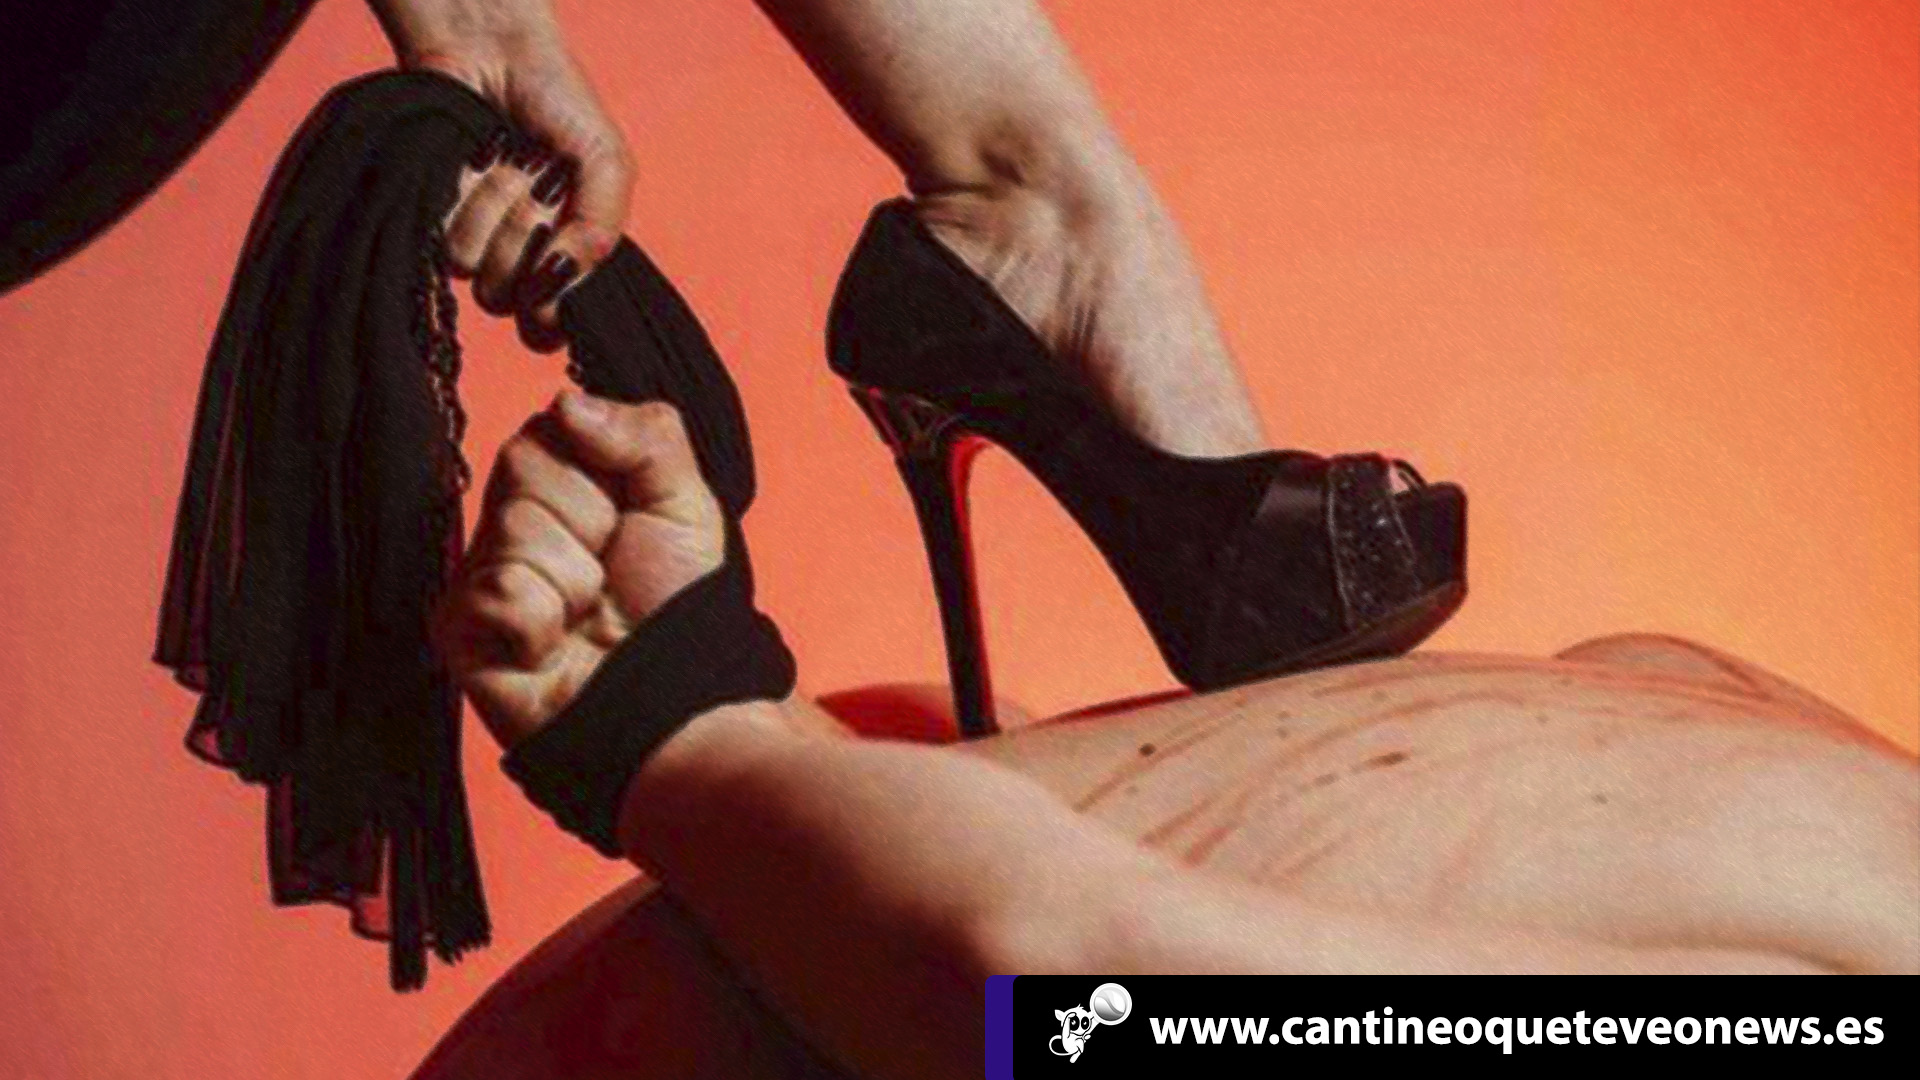 fetiches sexuales - cantineoqueteveo news